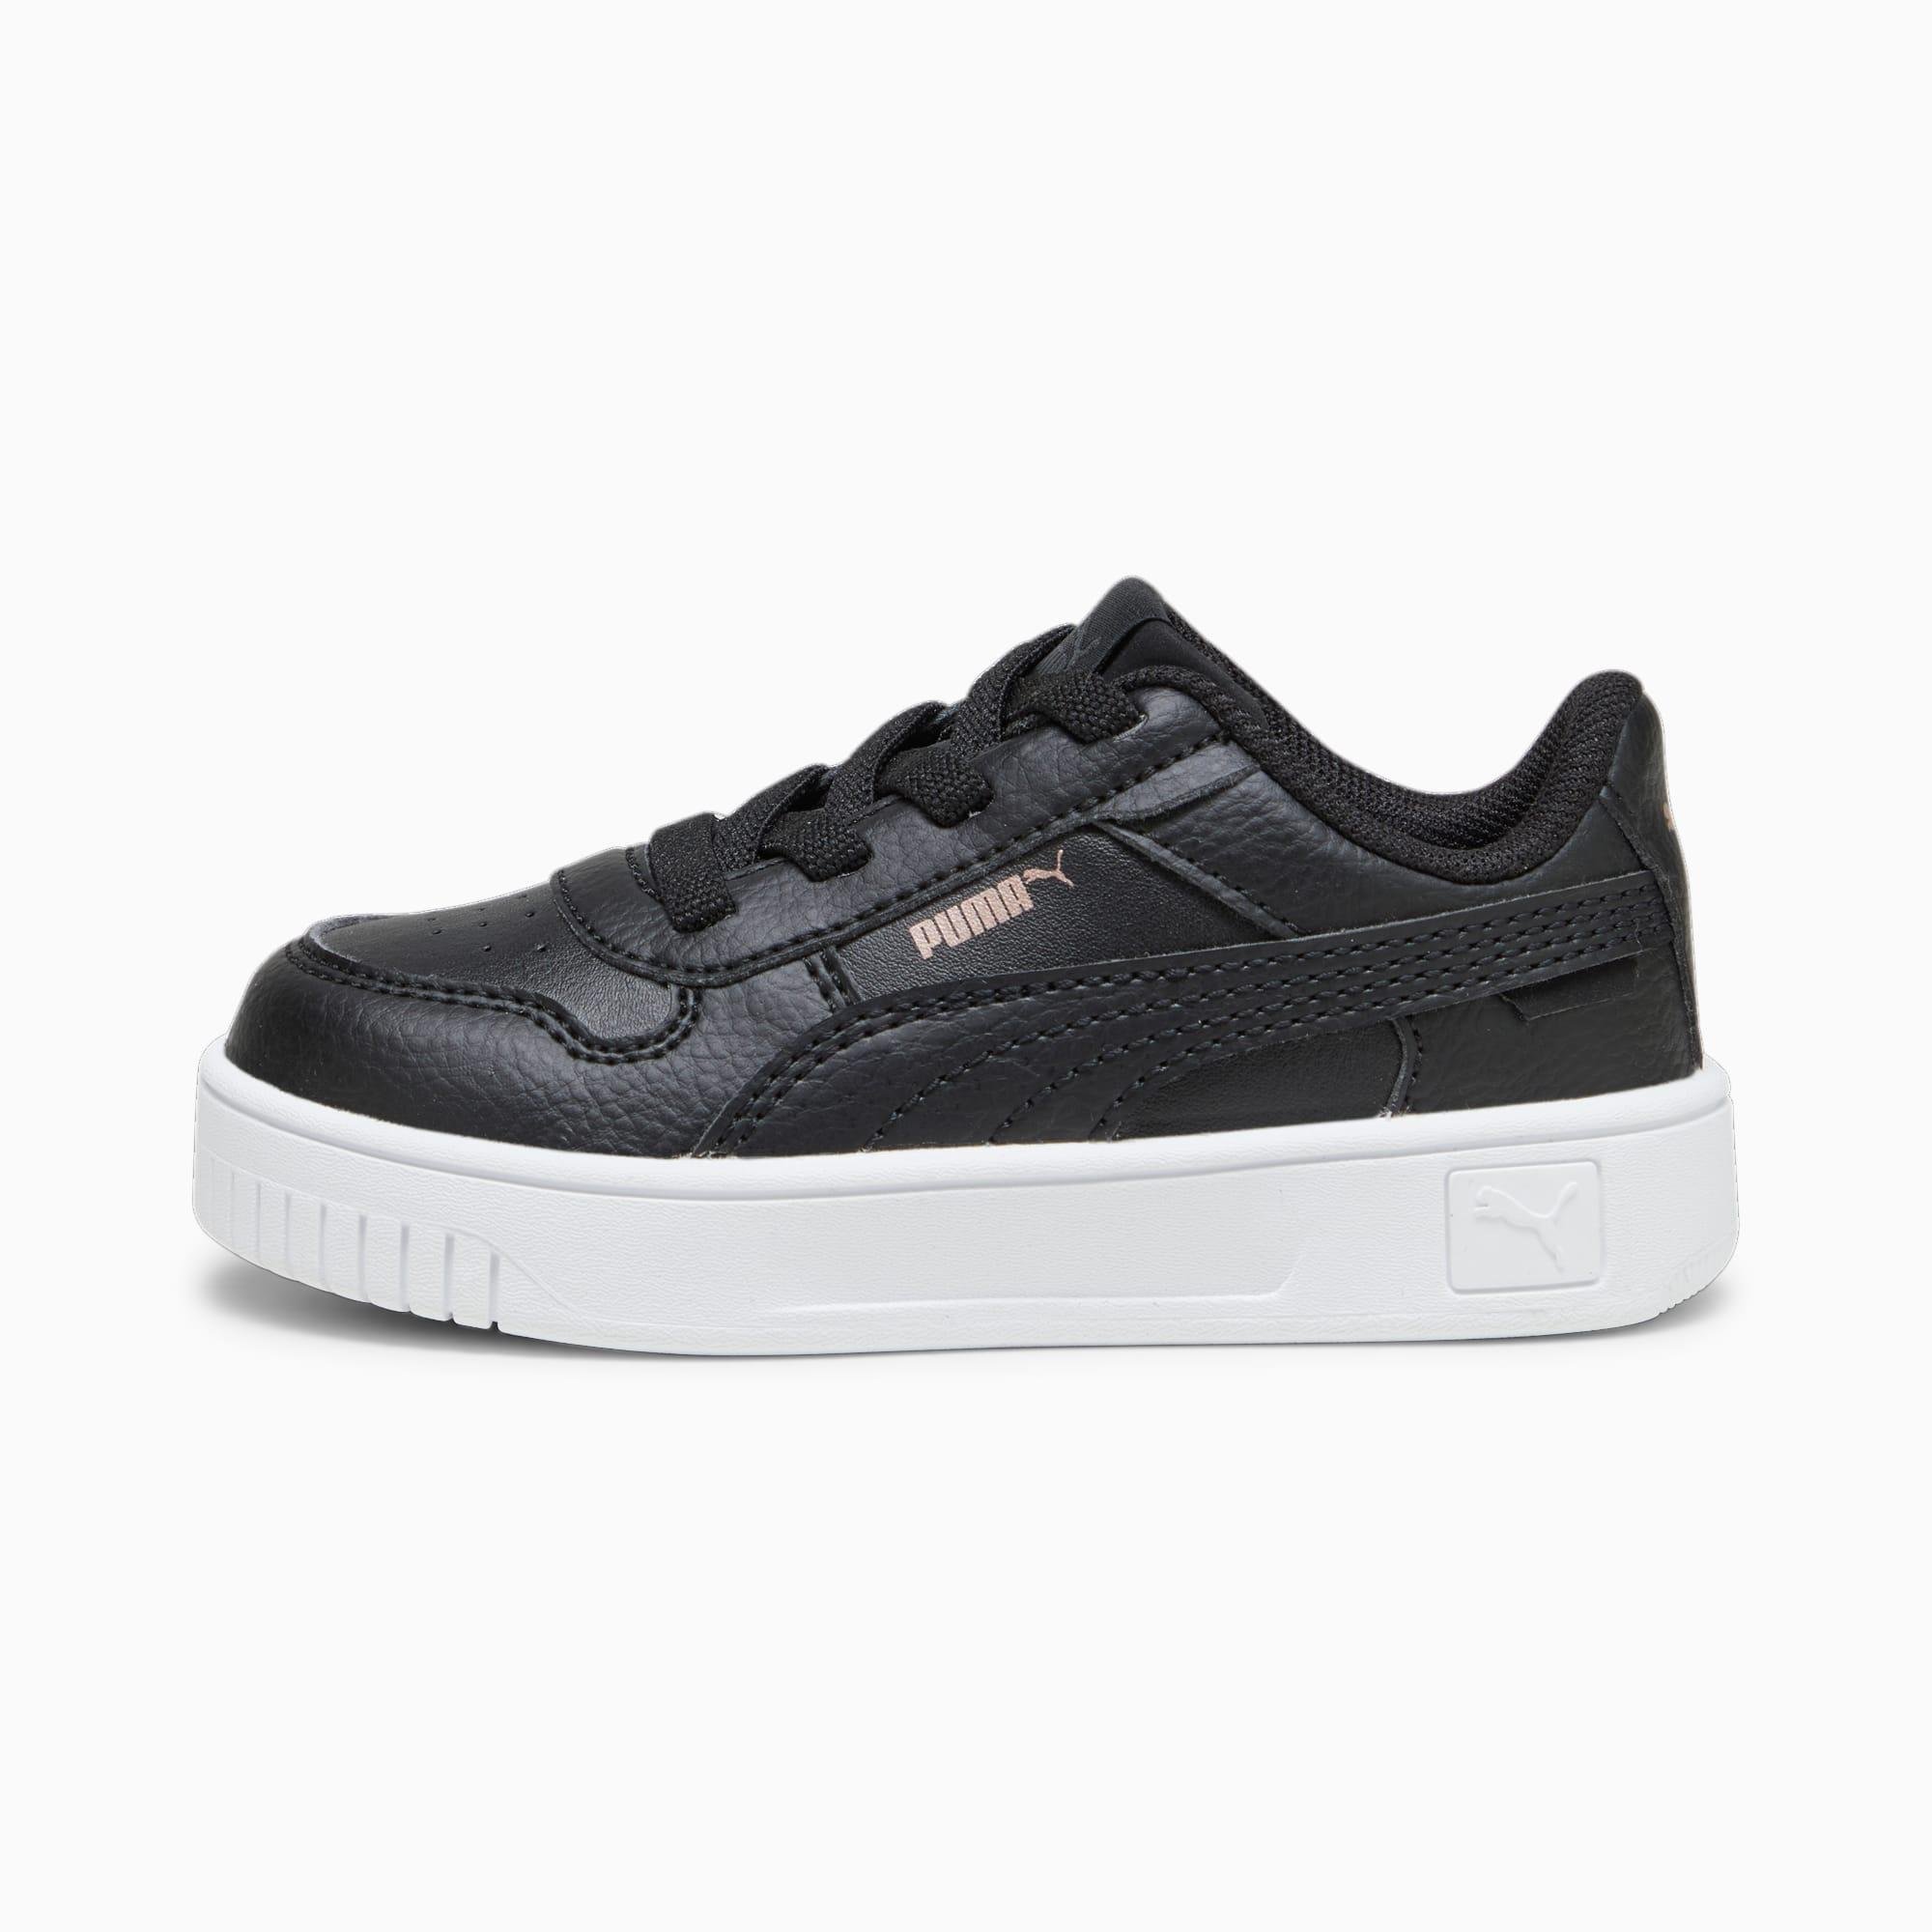 Carina Street Toddlers' Sneakers by PUMA